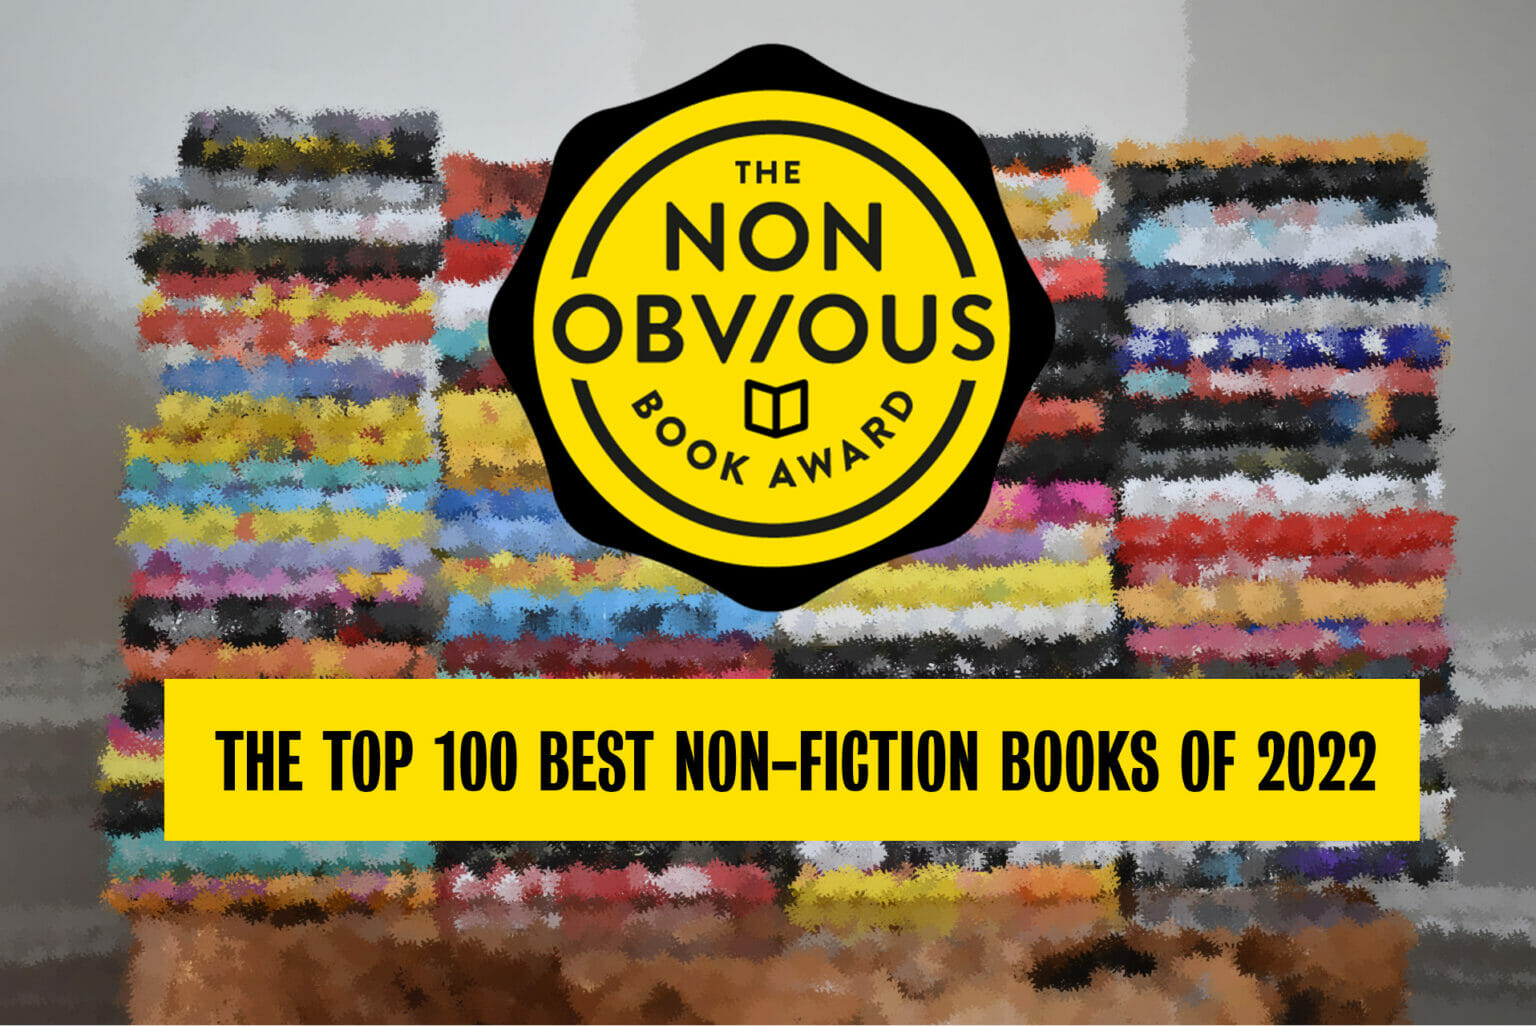 The 100 Best NonFiction Books of 2022 The NonObvious Book Awards